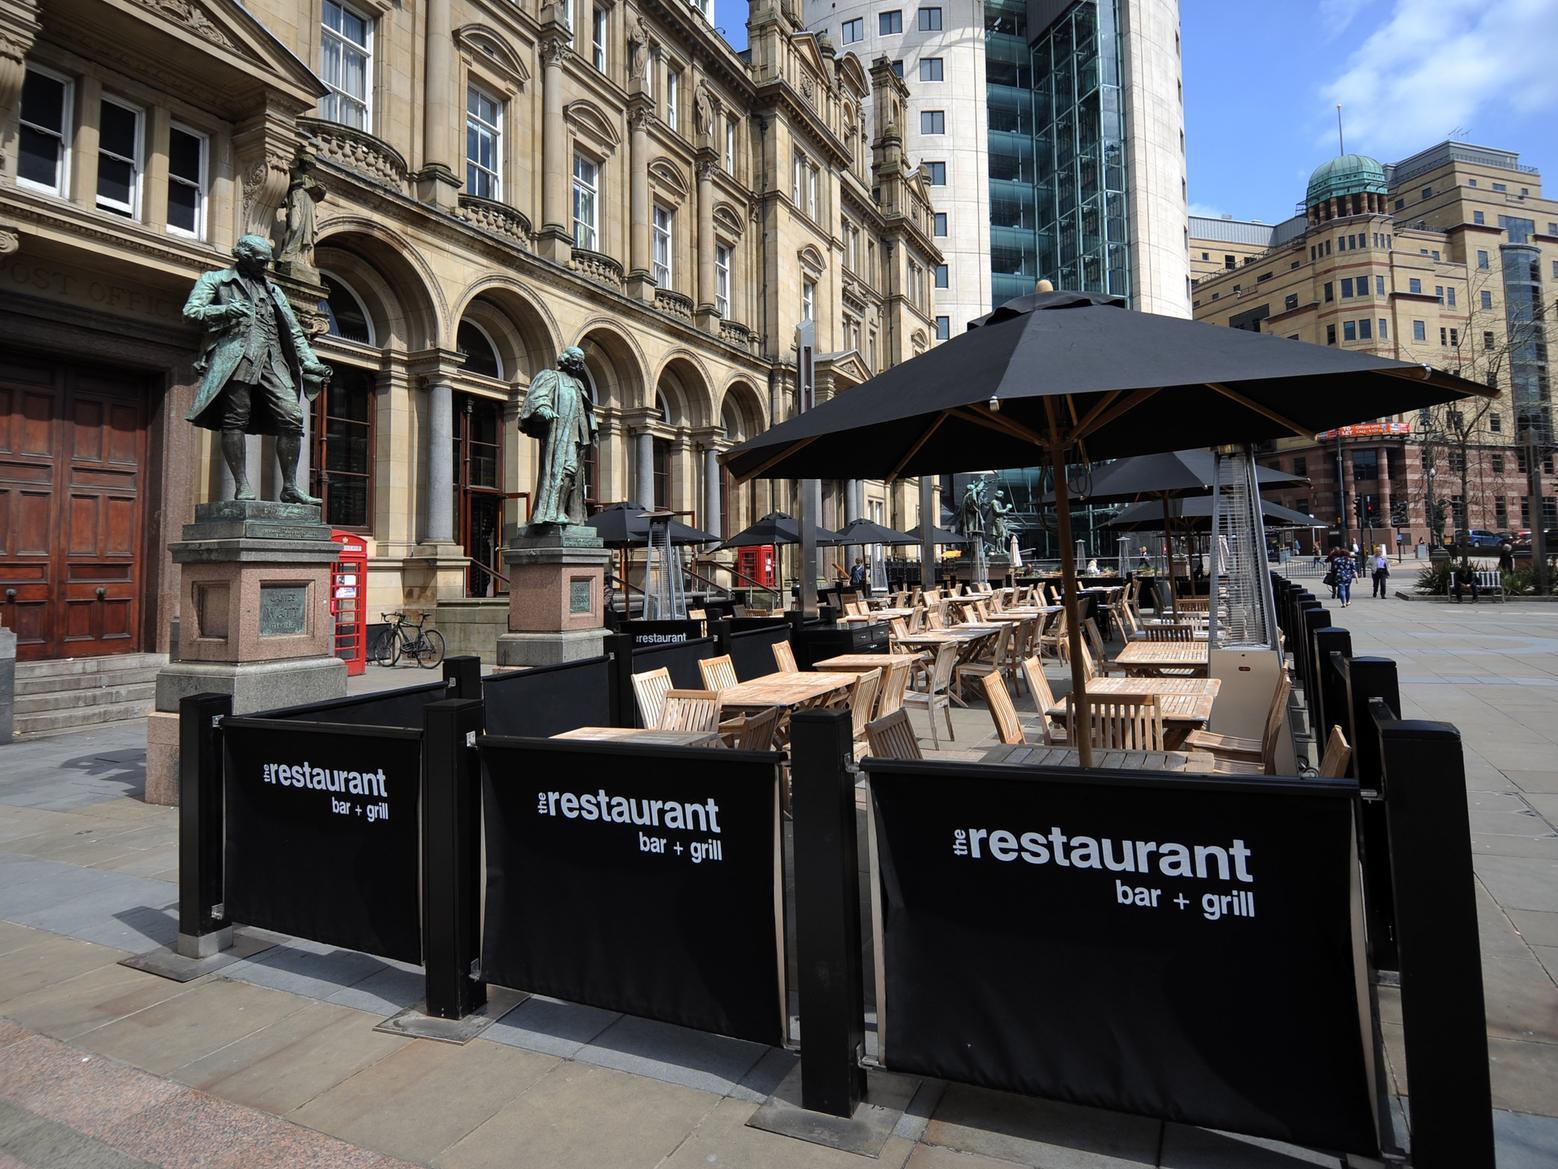 Get 50% of your food spend back when you eat at the Bar & Grill on City Square. This deal is available to Club Individual members and you'll get 50% back as points on your card. New members can sign up for free.